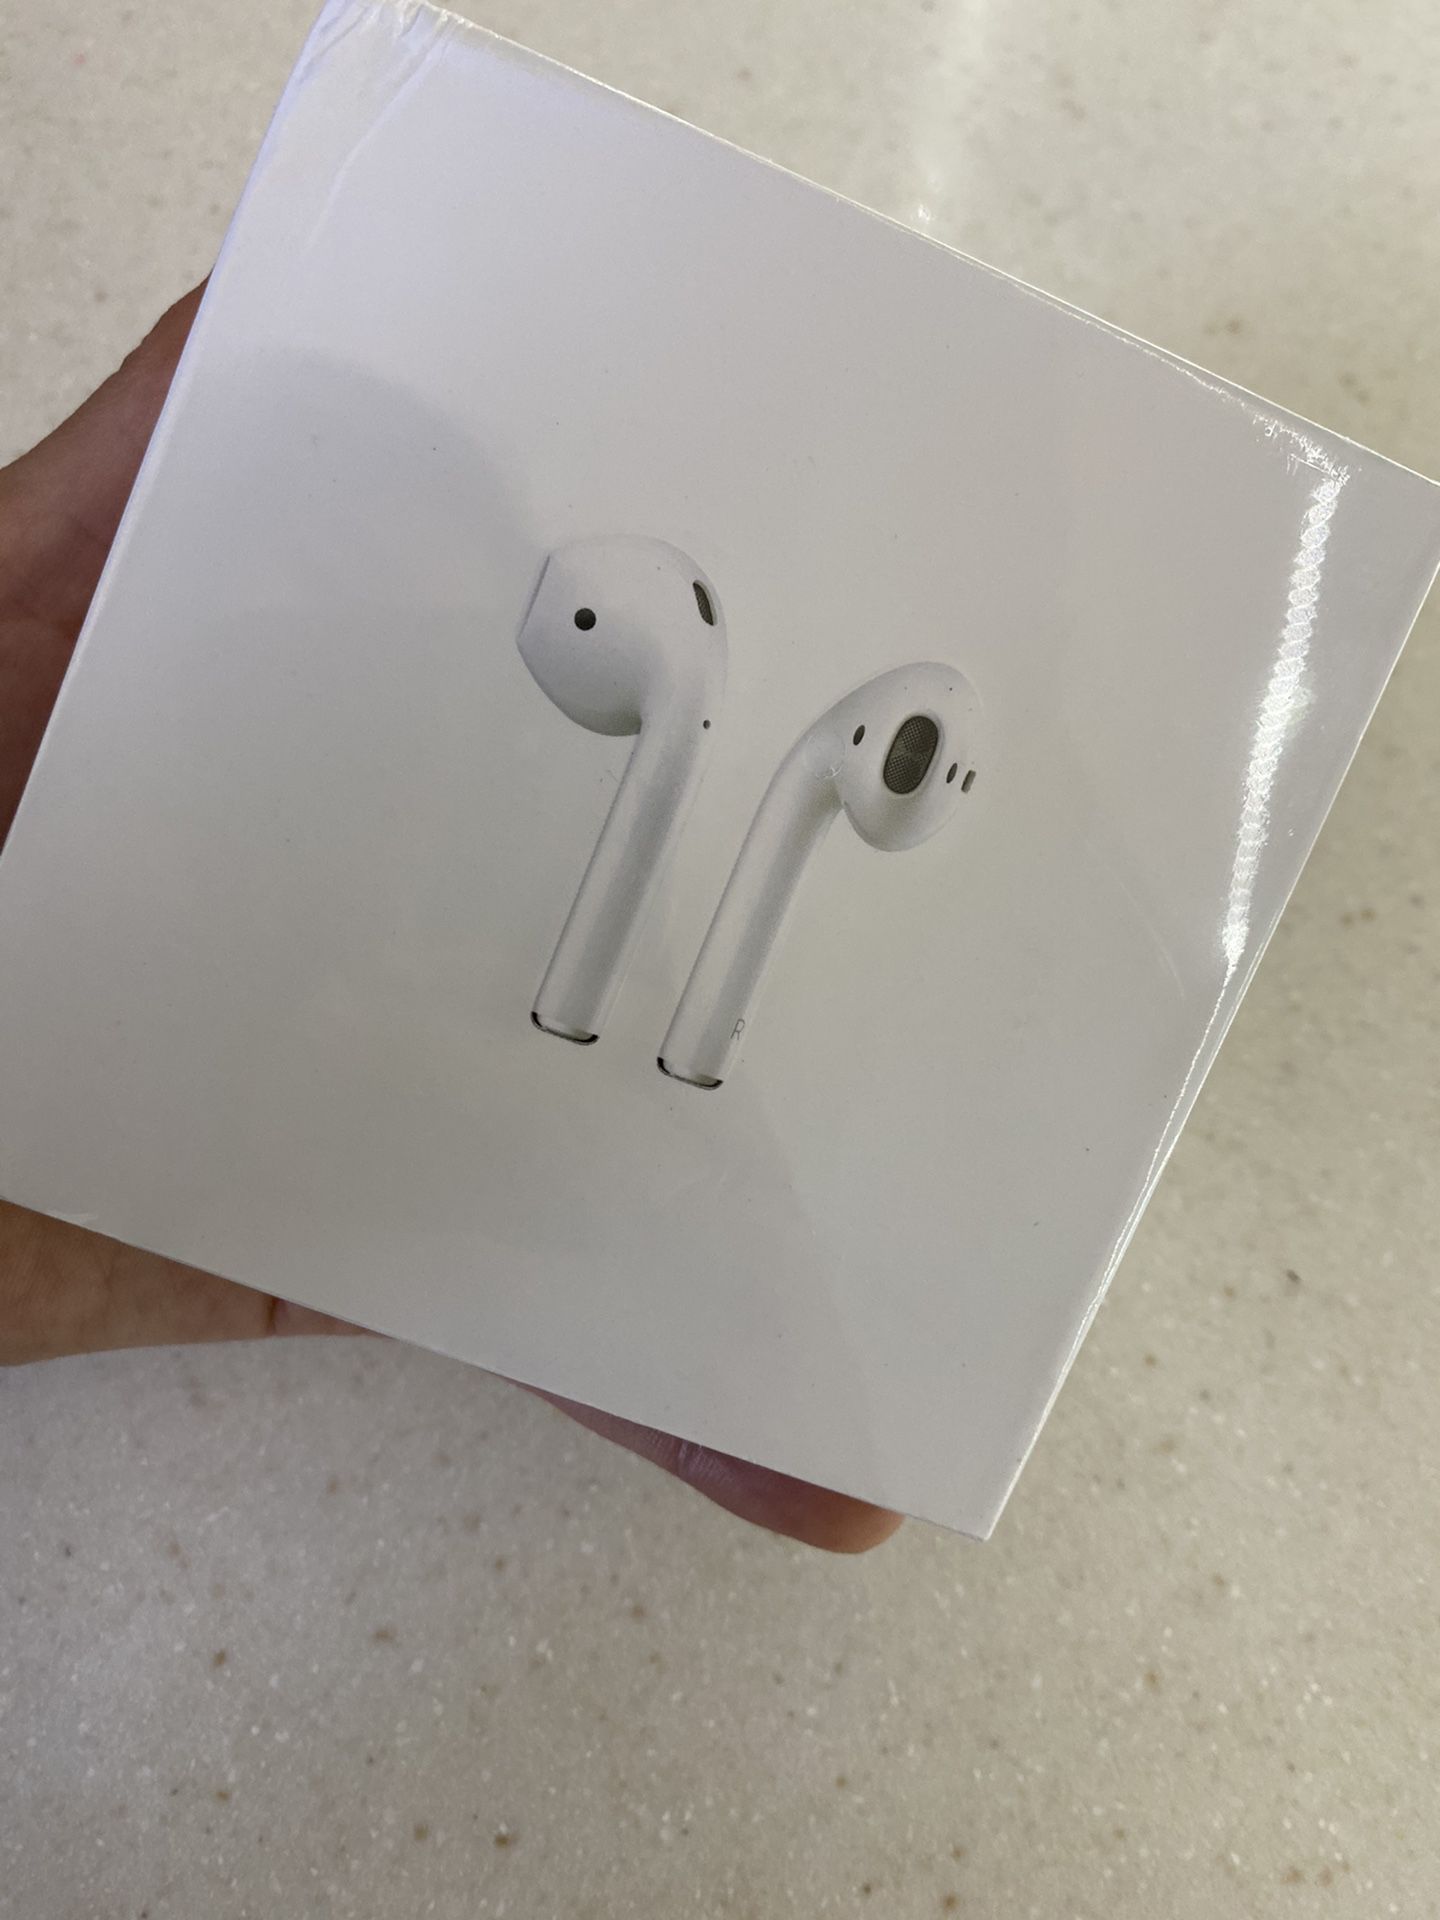 APPLE AIR PODS BRAND NEW IN BOX